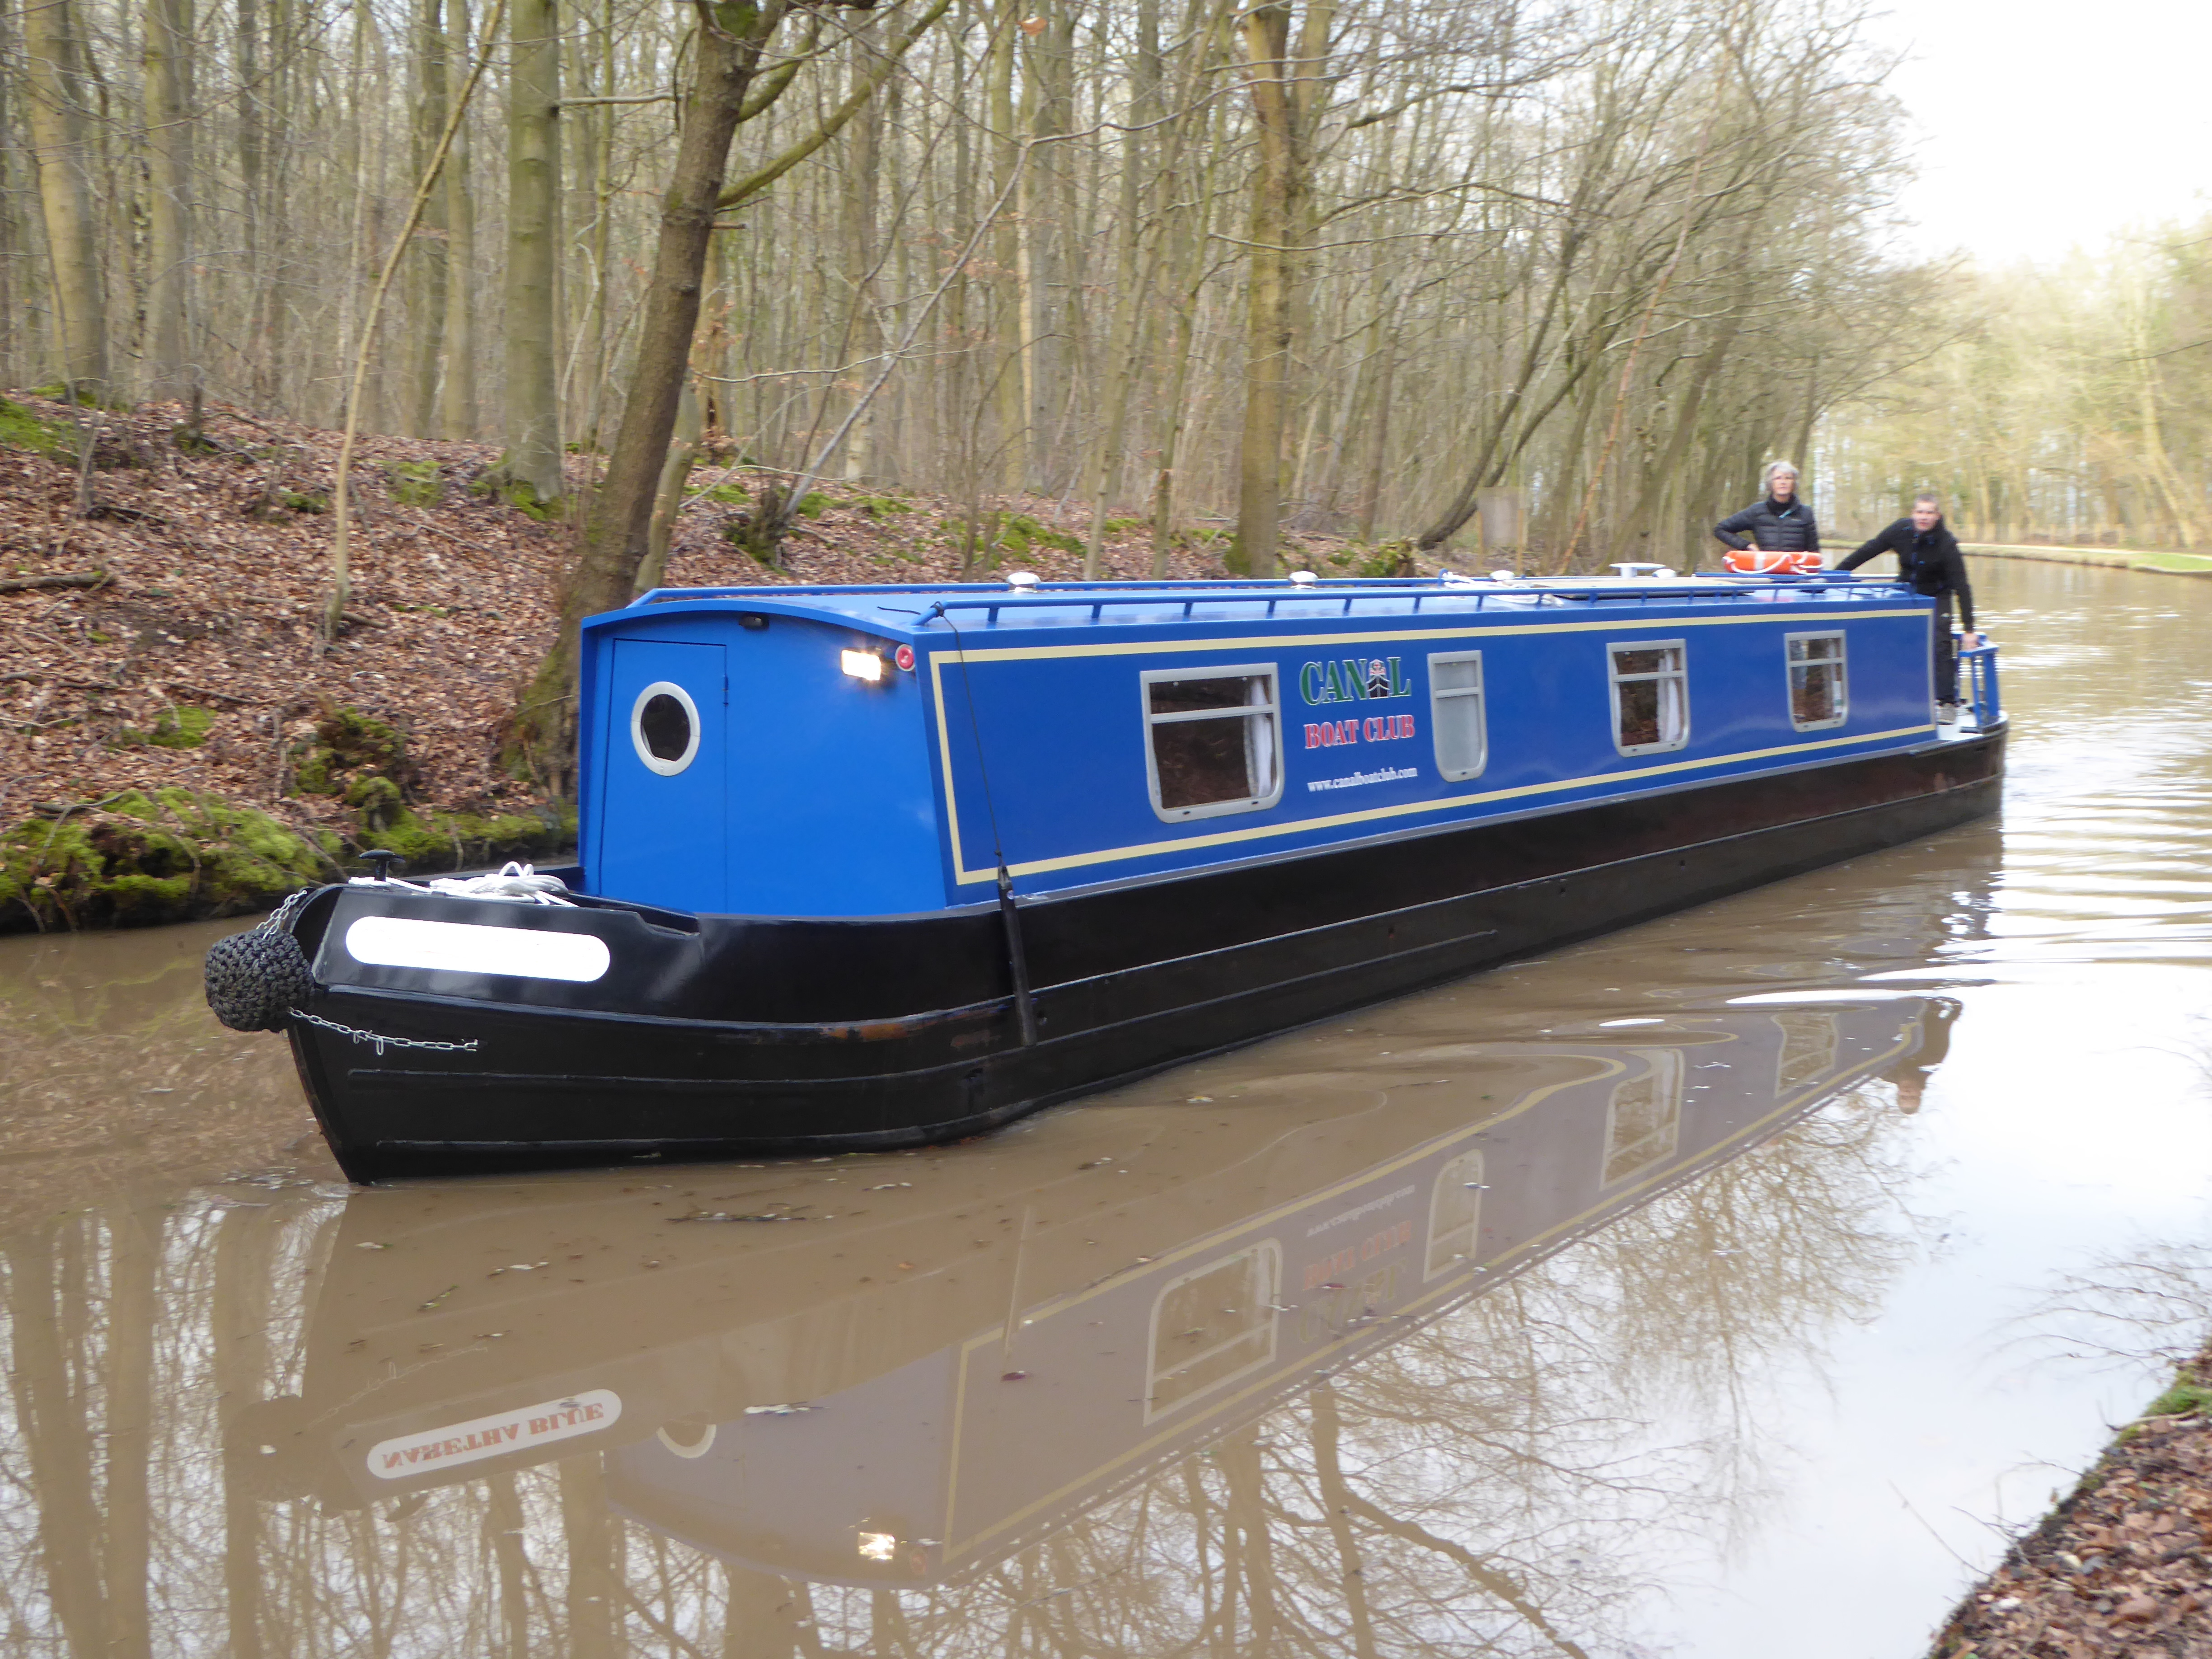 The CBC4 class canal boat